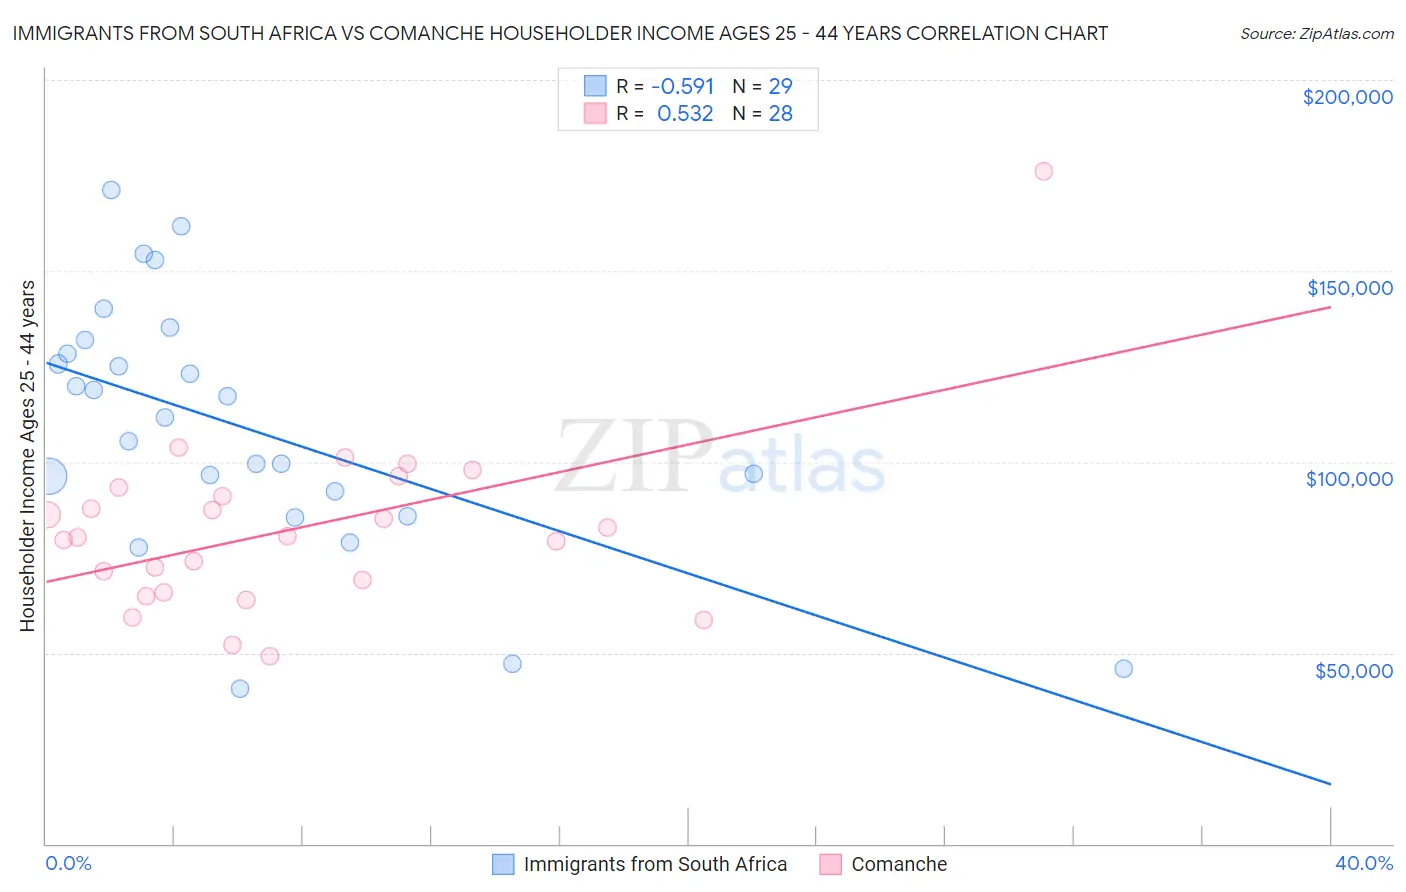 Immigrants from South Africa vs Comanche Householder Income Ages 25 - 44 years